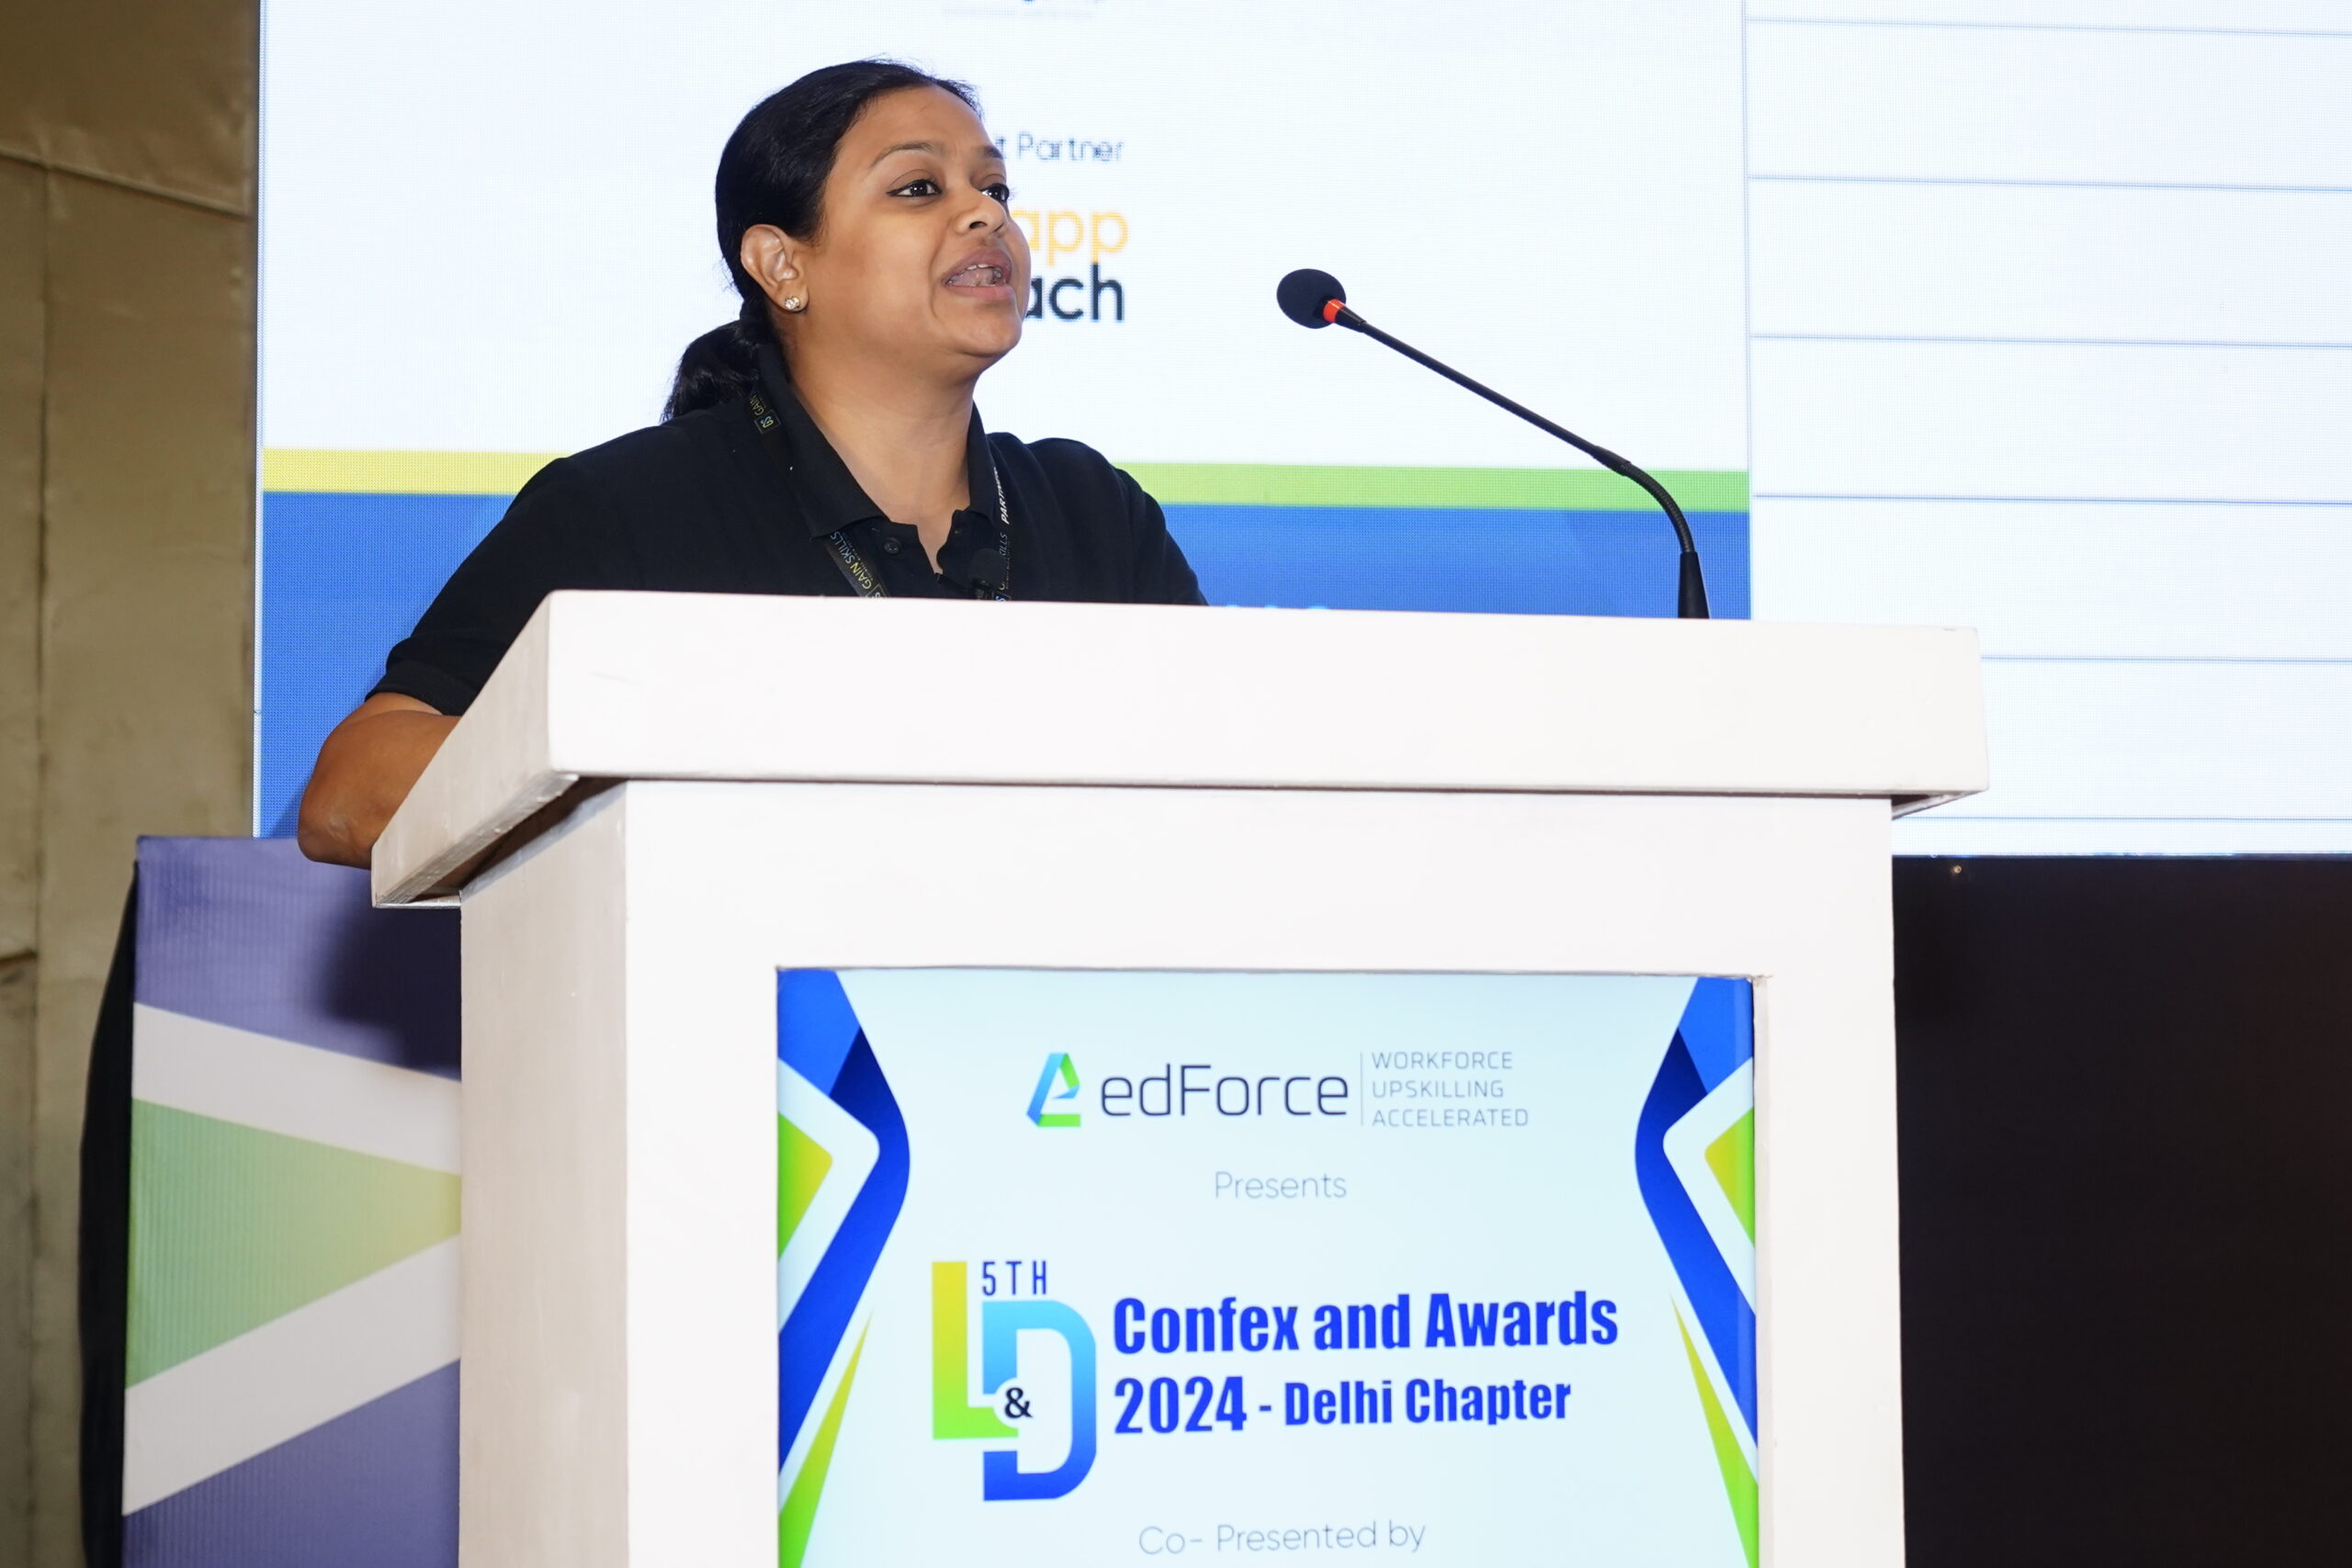 Guncha Mittal Head of Customer Success epresenting edForce on stage at the L&D Confex and awards 2024 DELHI